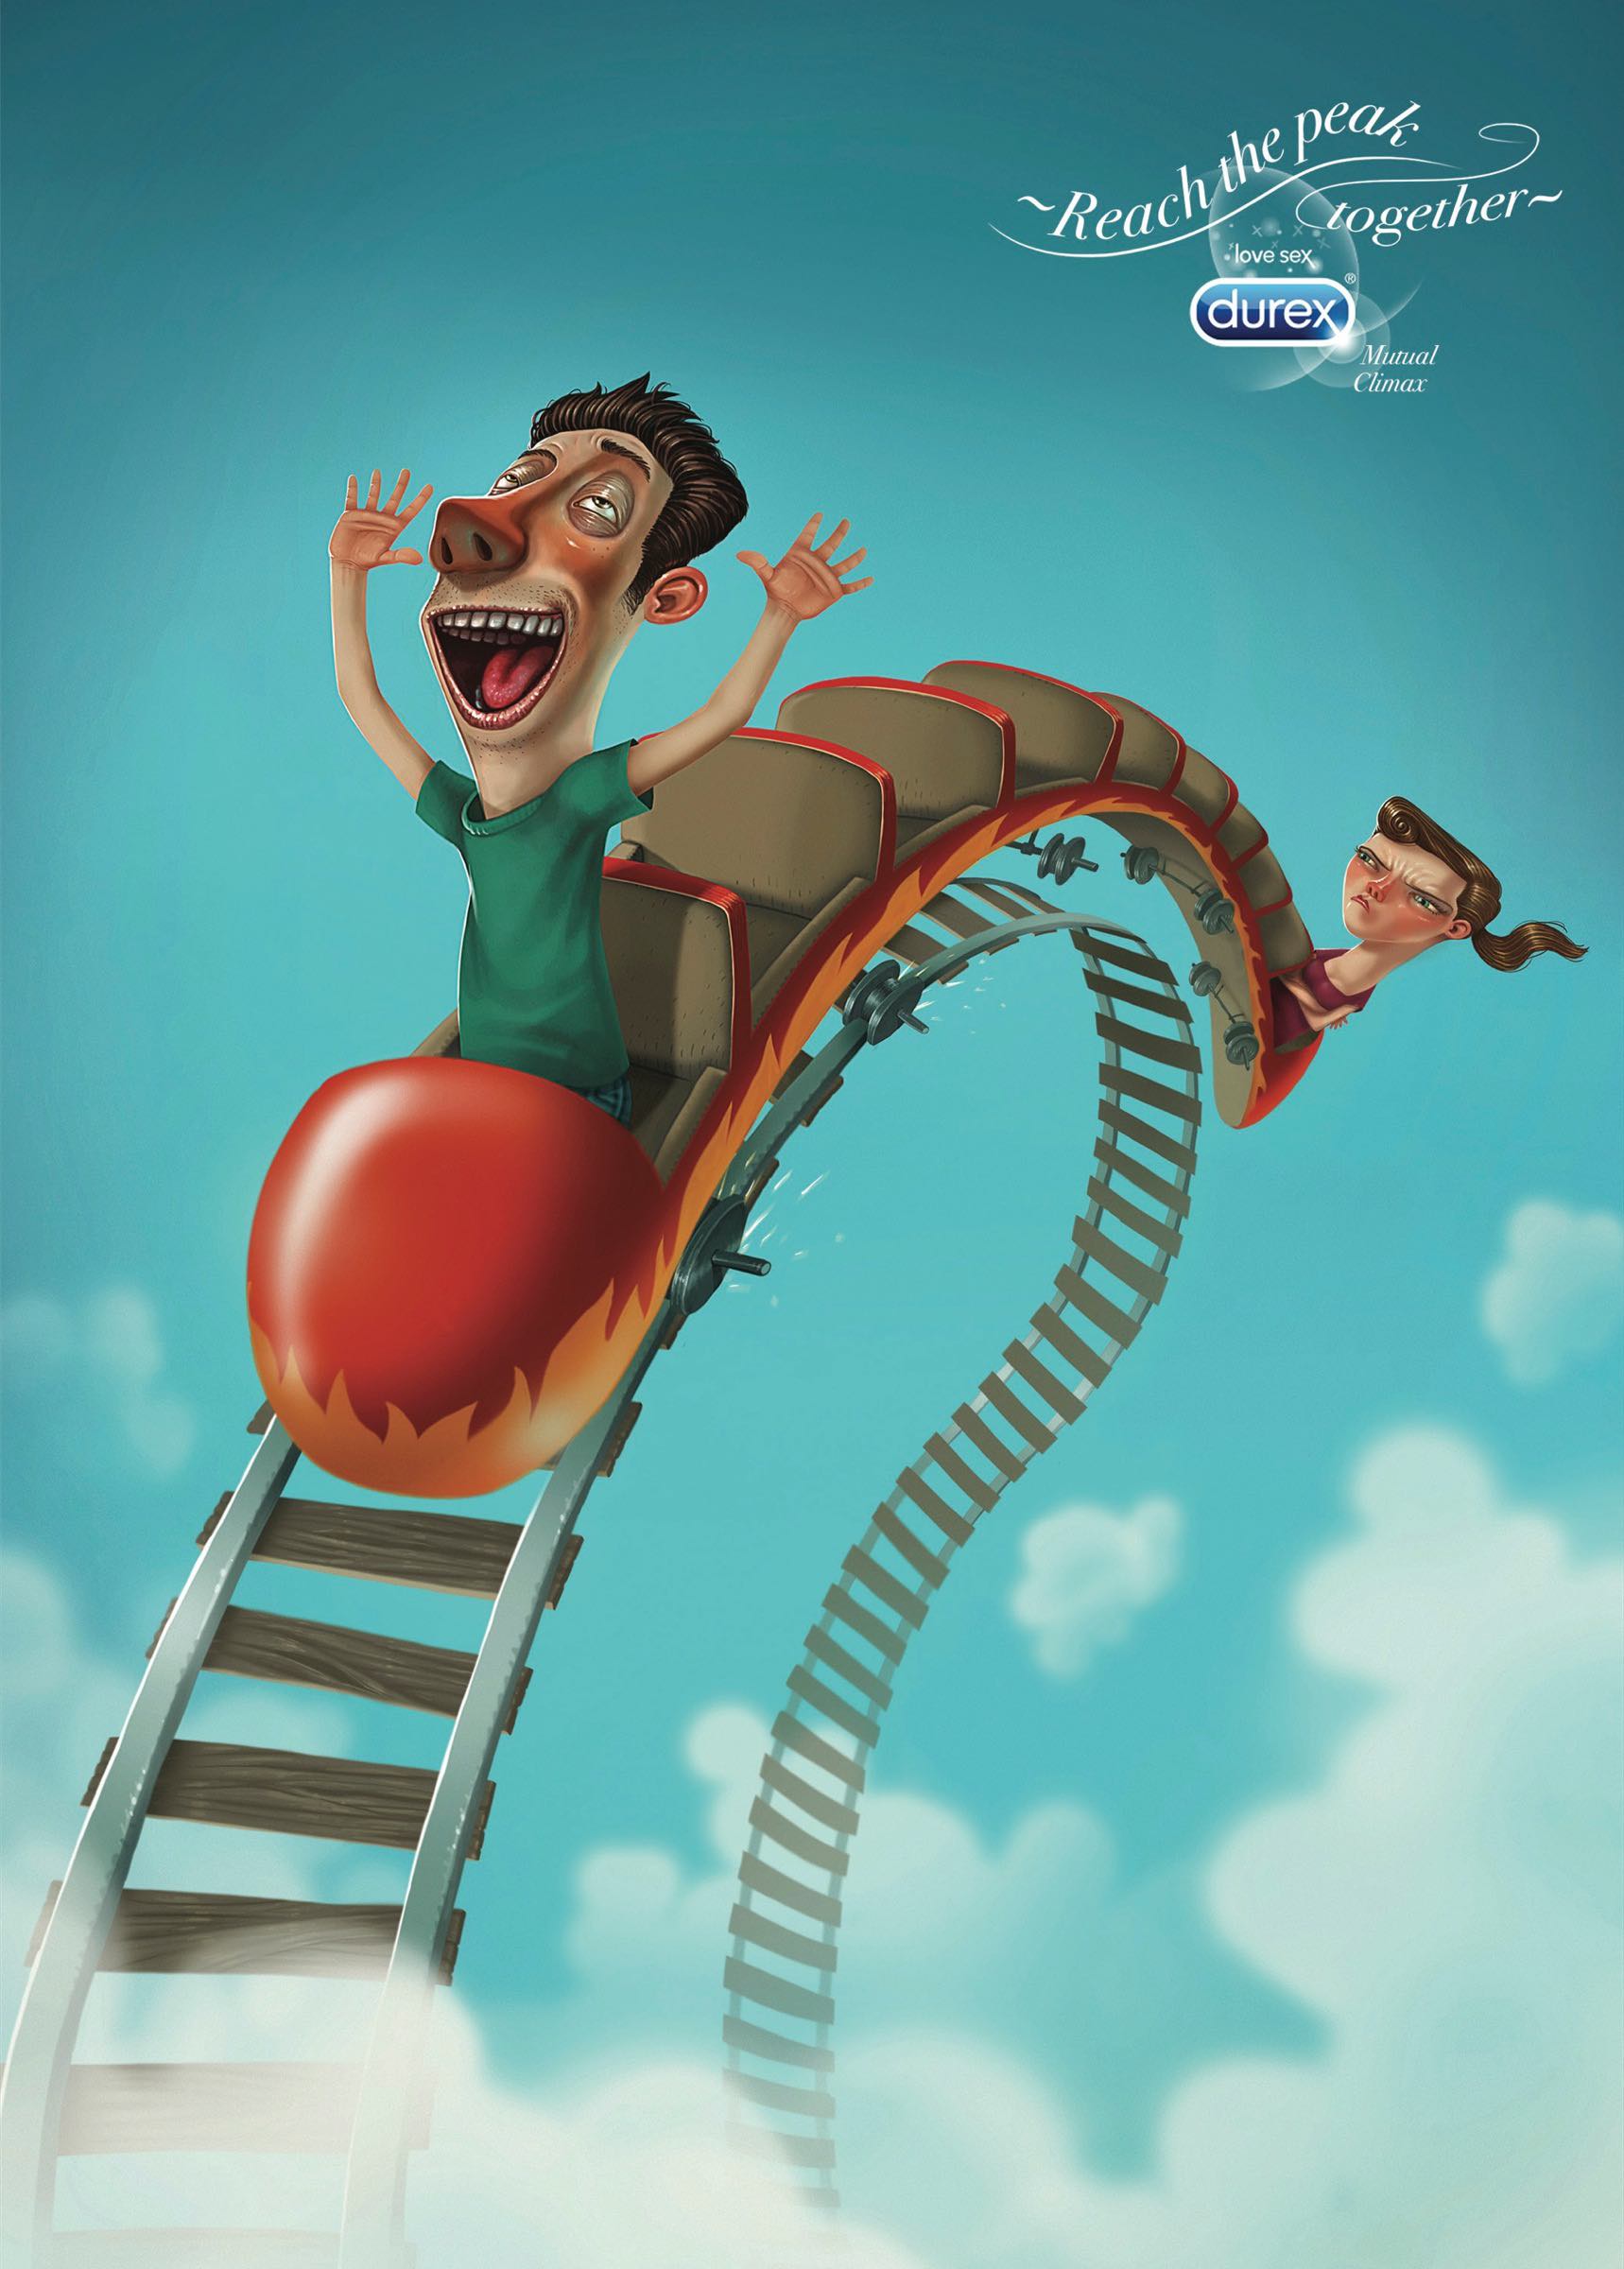 Durex: Rollercoaster, Reach the peak together Telcel: Selfie Campaigns of the World®